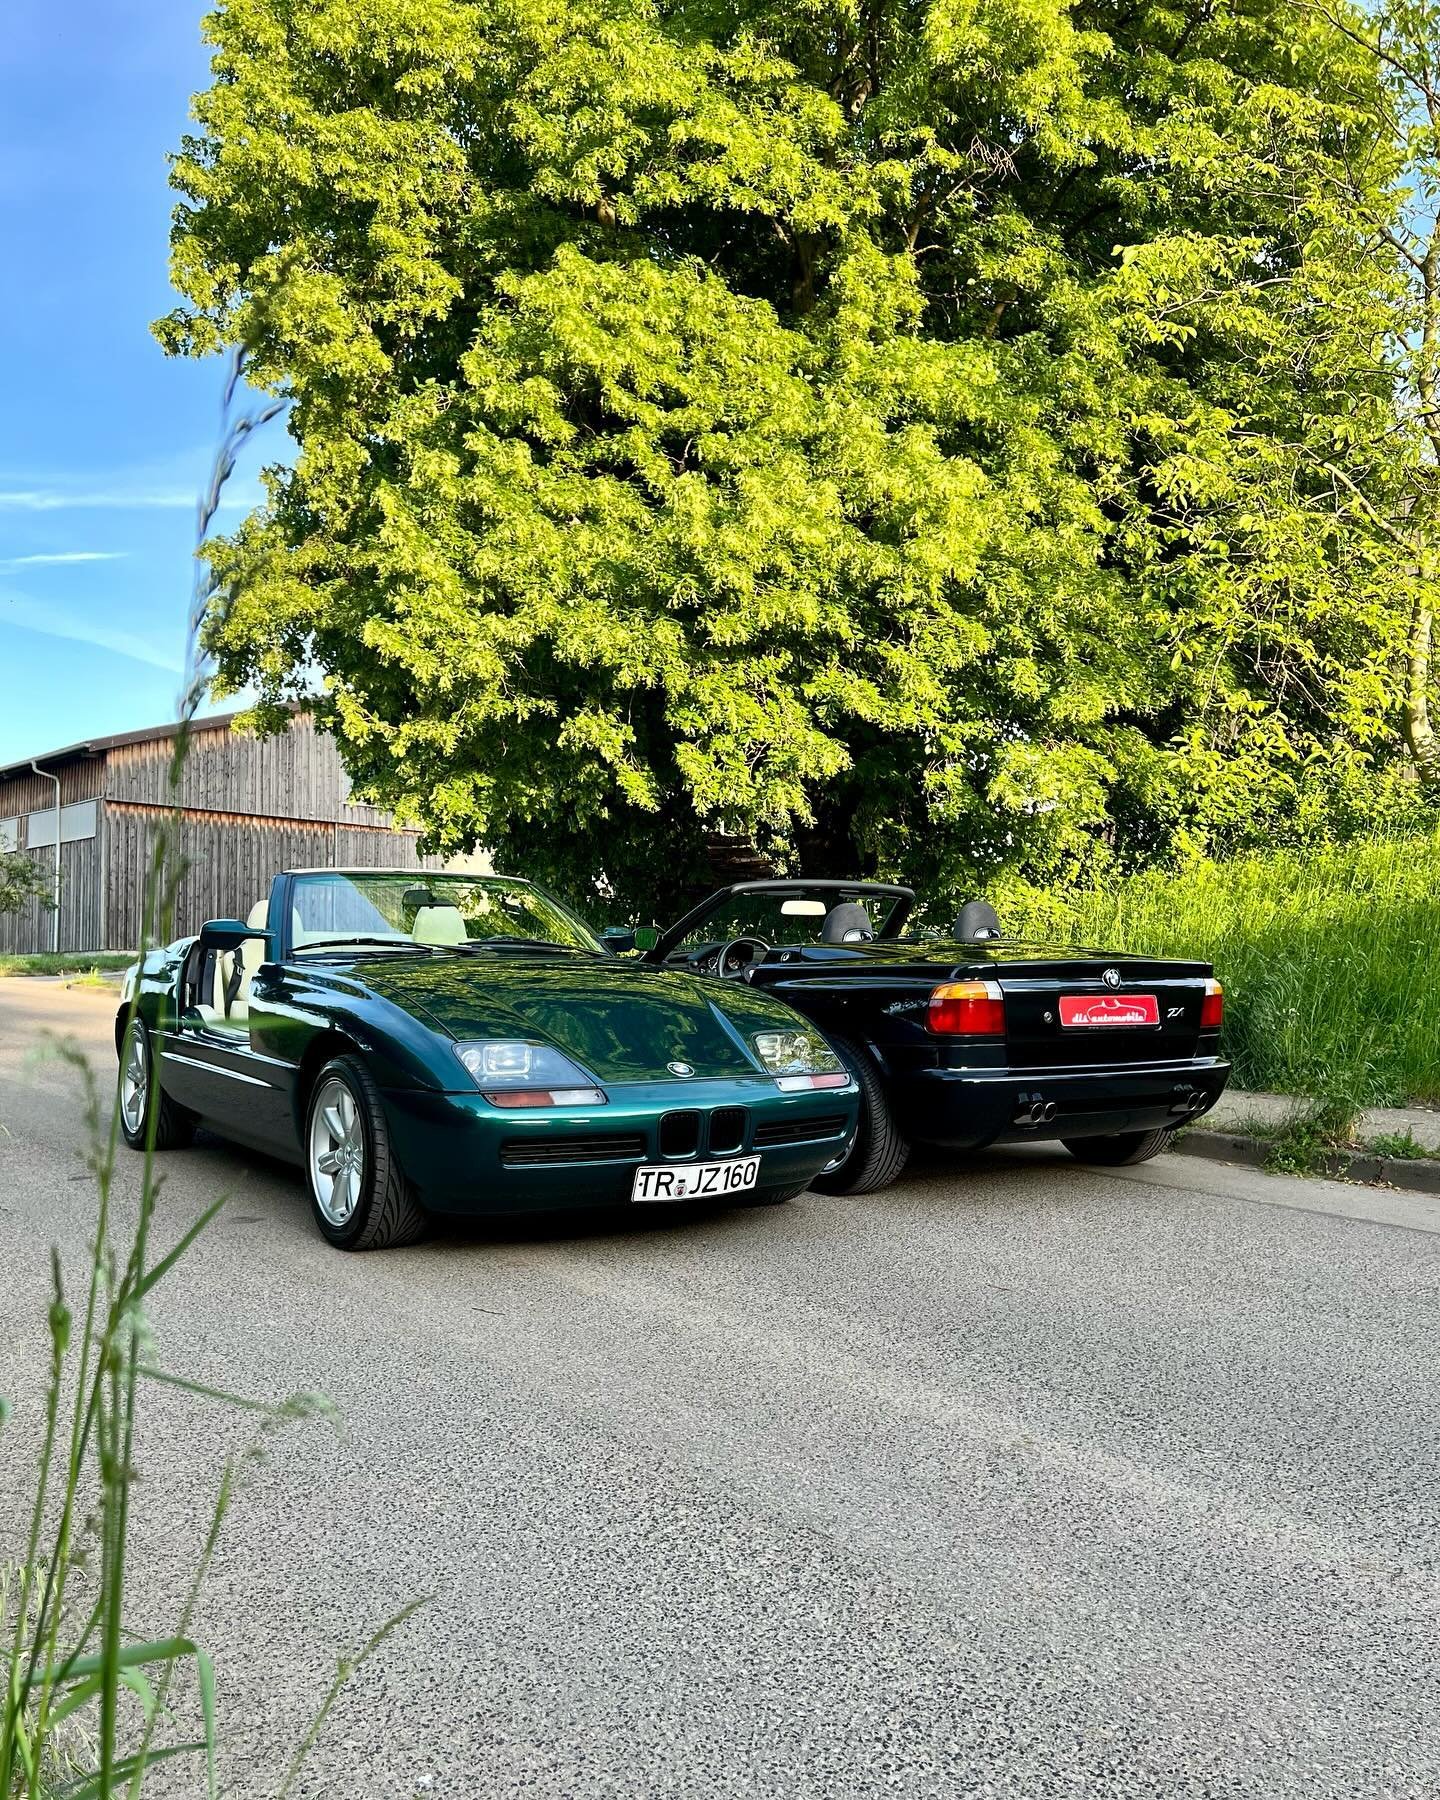 Z1⁣&sup2;-Zundaydrive.⠀
⠀
Launched 35 years ago - still modern, unique and timeless today. All the details about the two &sbquo;Zukunft1&rsquo; on our website. The &sbquo;urgr&uuml;n&lsquo;-one is still on DIN plates 🫠.⠀
⠀⠀
#dlsautomobile #bmwz1 #z1